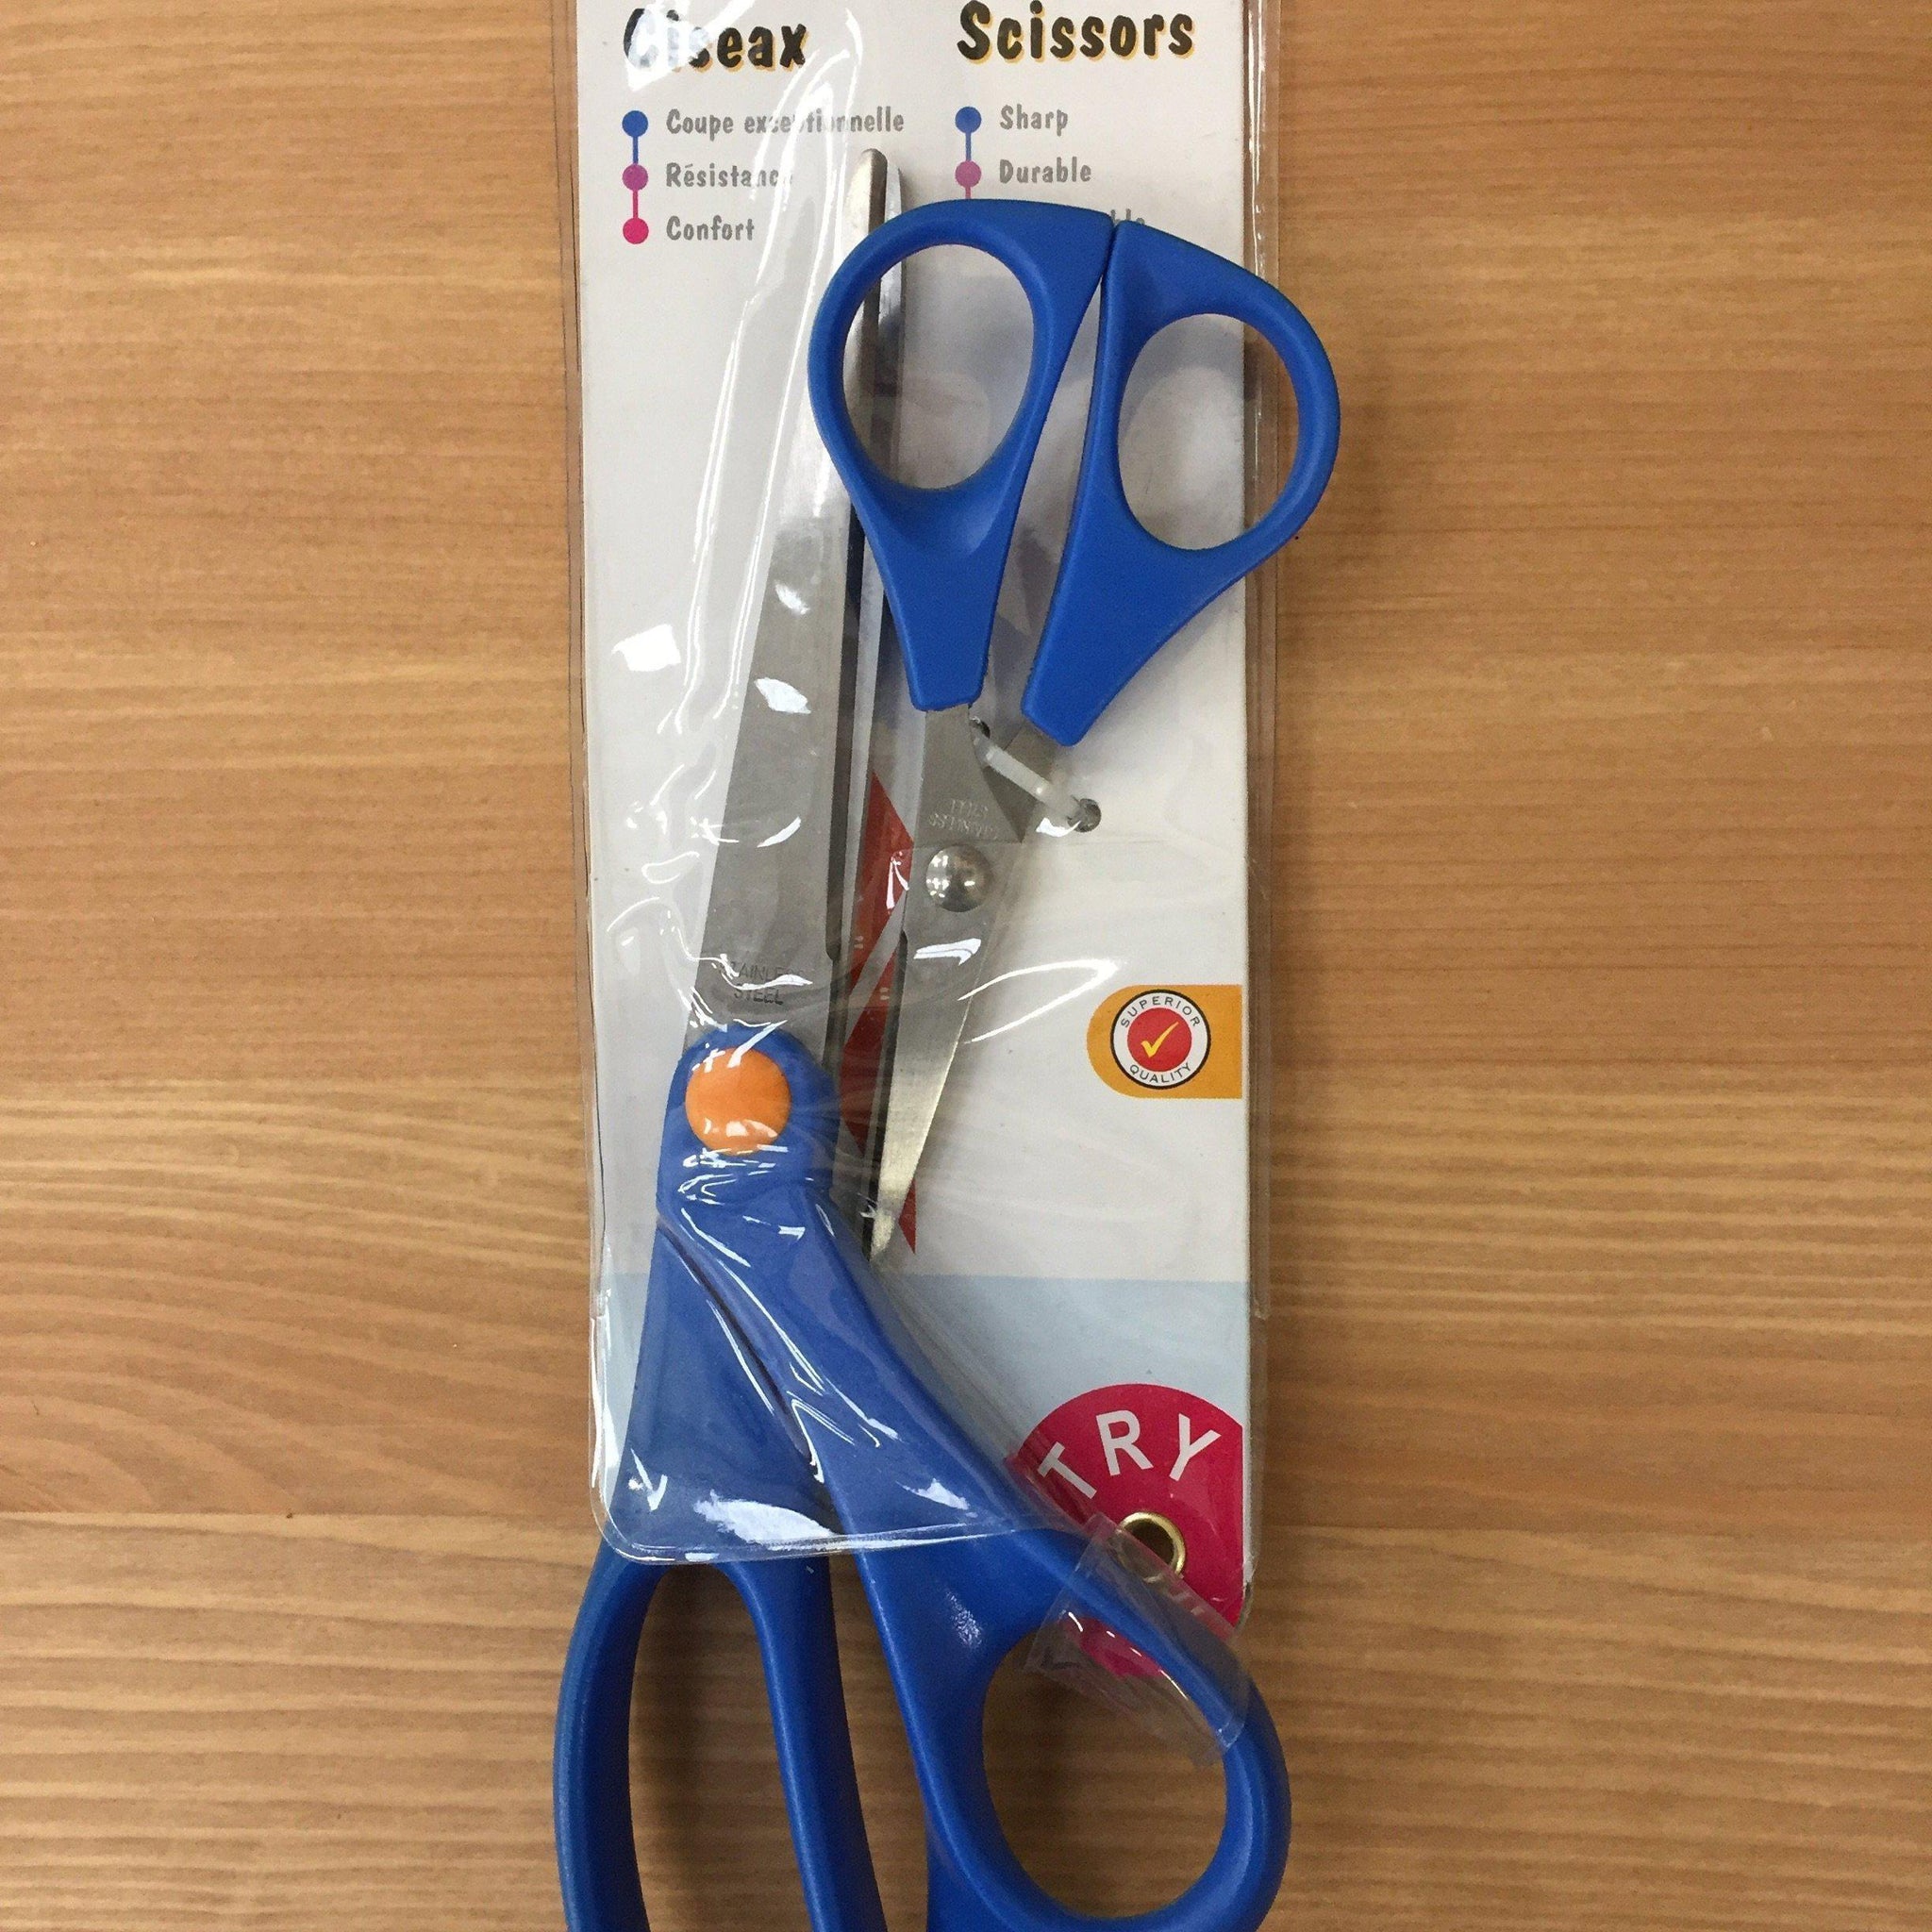 Brights Scissors 21 cm and 11,5 cm Brights Measuring Tools and Cutting - Fabric Mouse